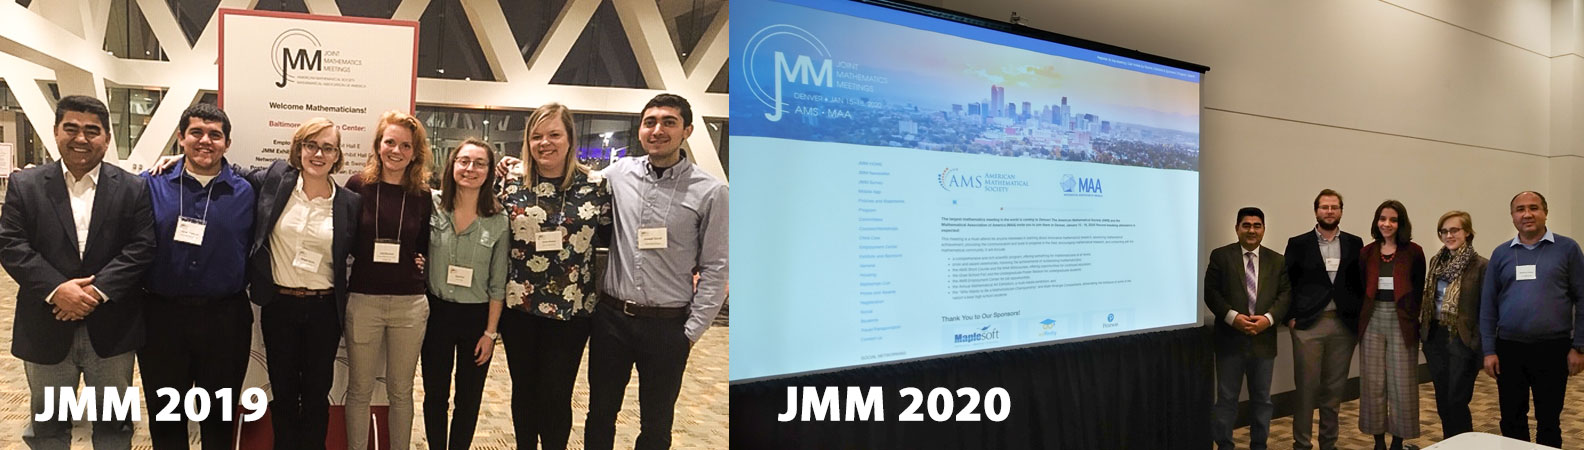 jmm conferences with students